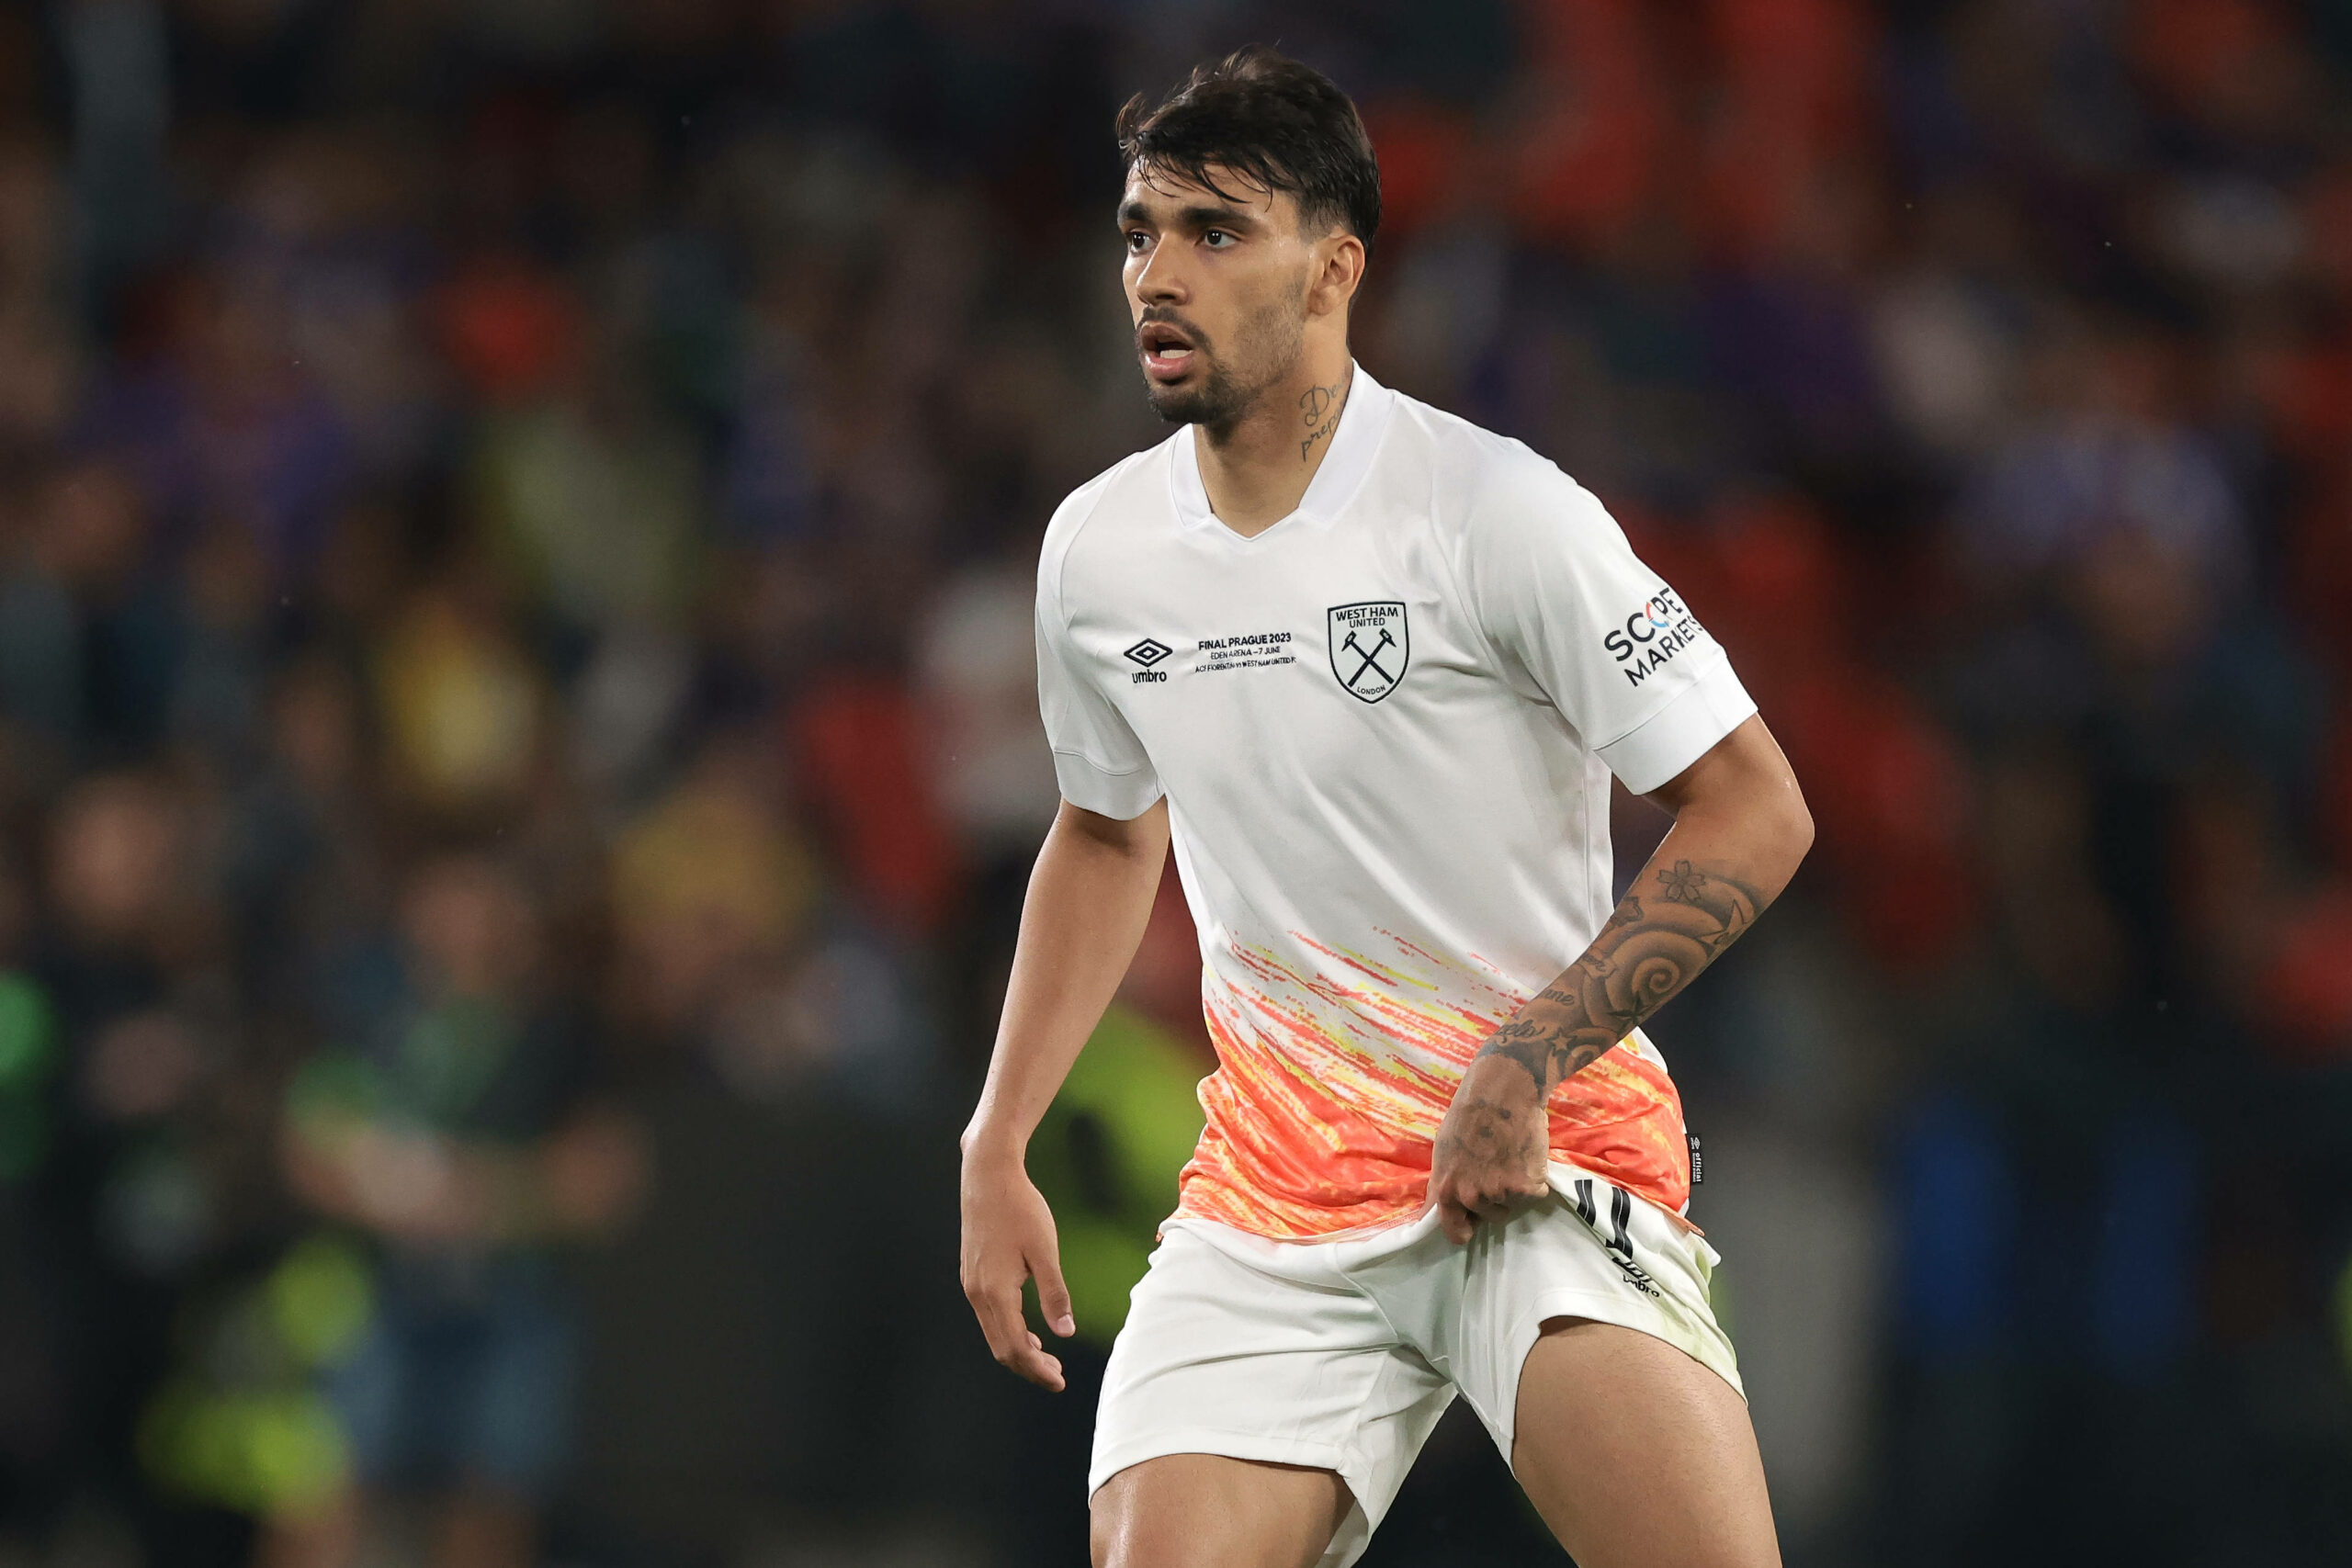 Lucas Paqueta signs for West Ham from Lyon in club-record £51m